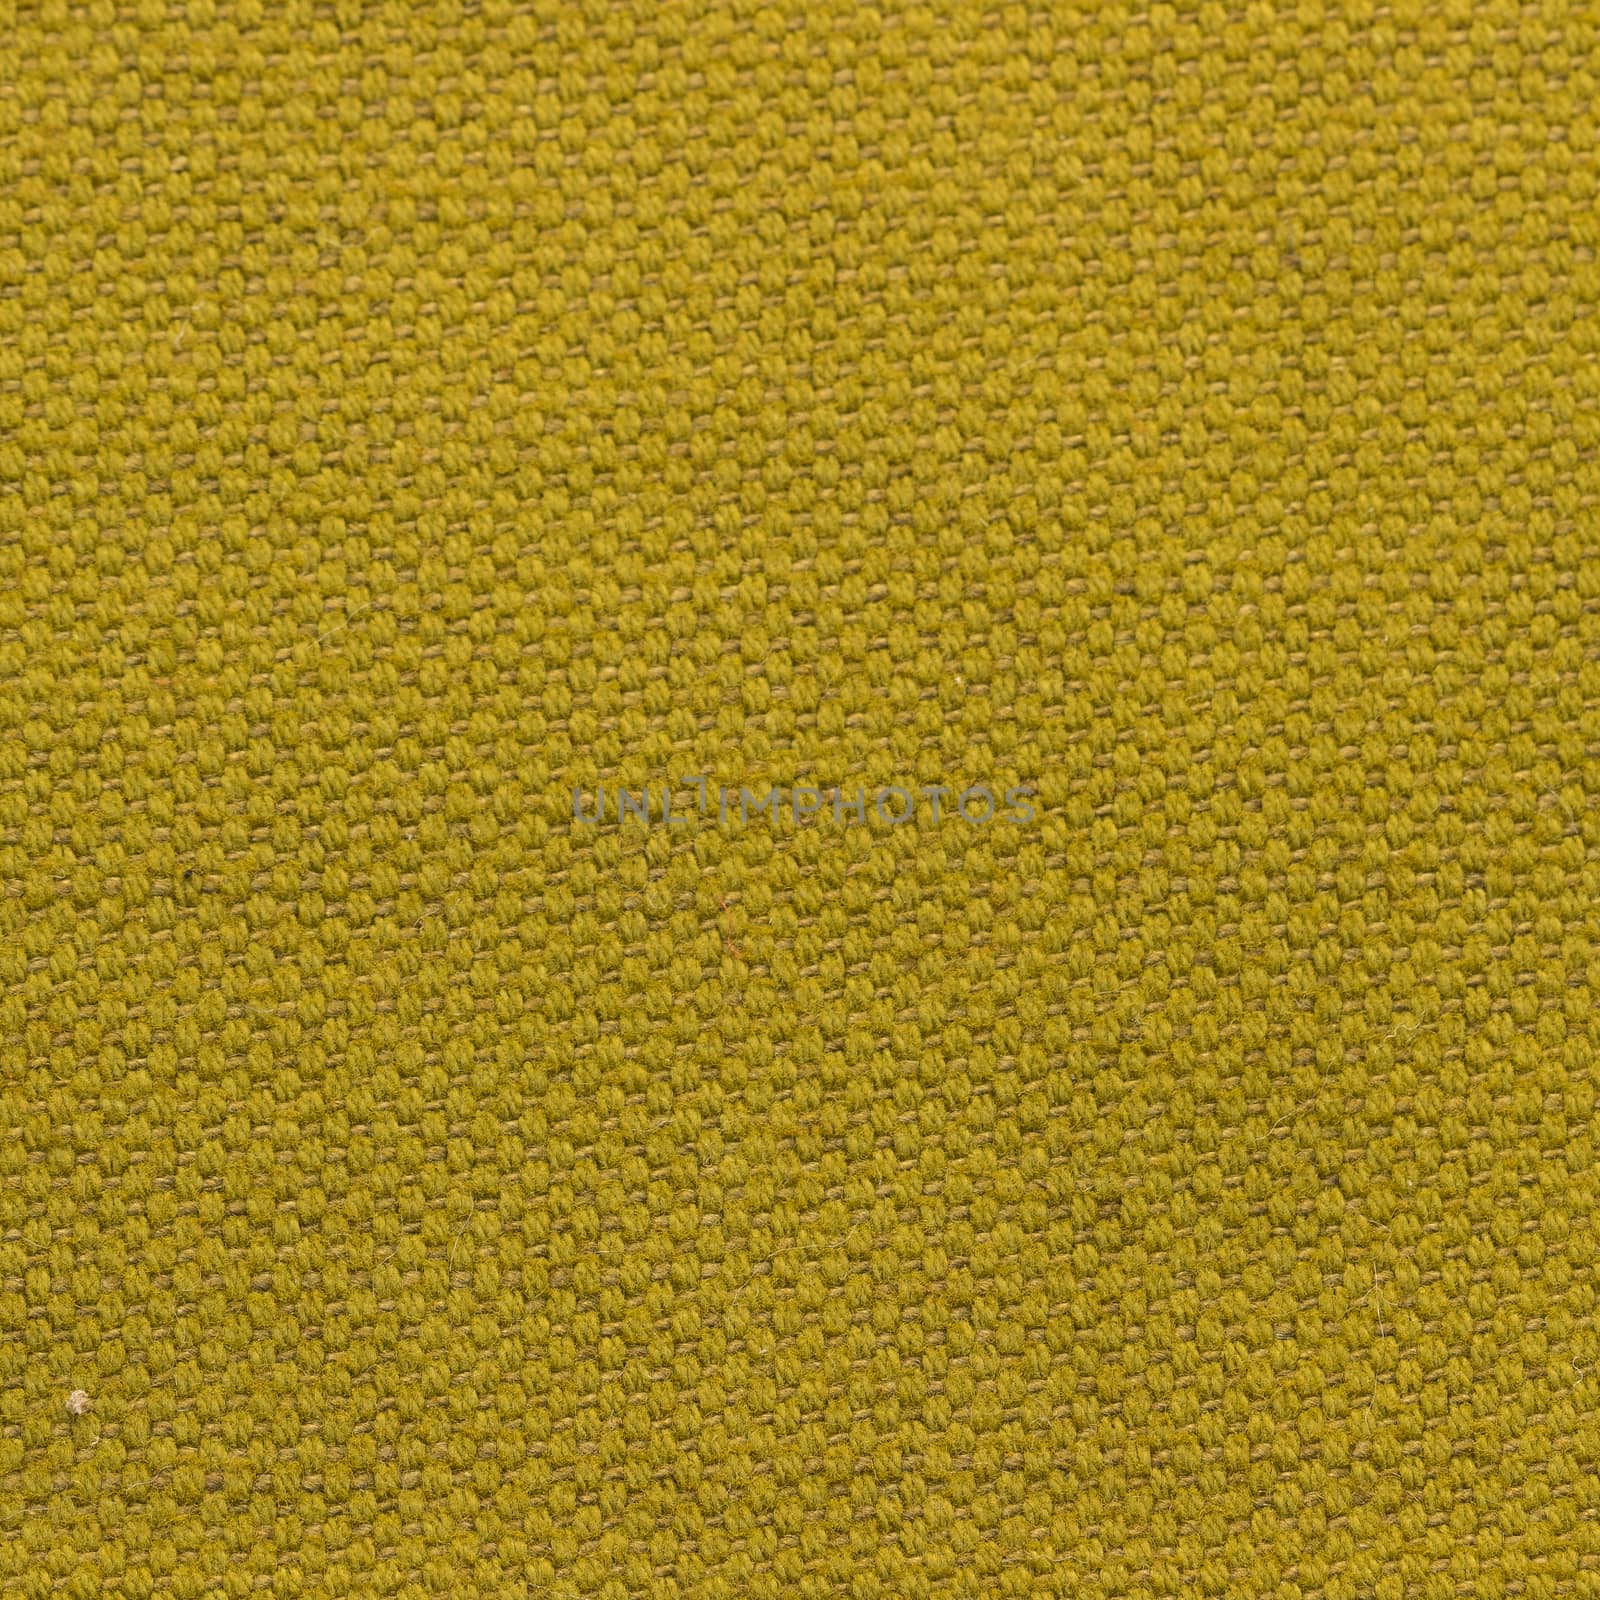 Rustic canvas fabric texture in mustard color. Square shape